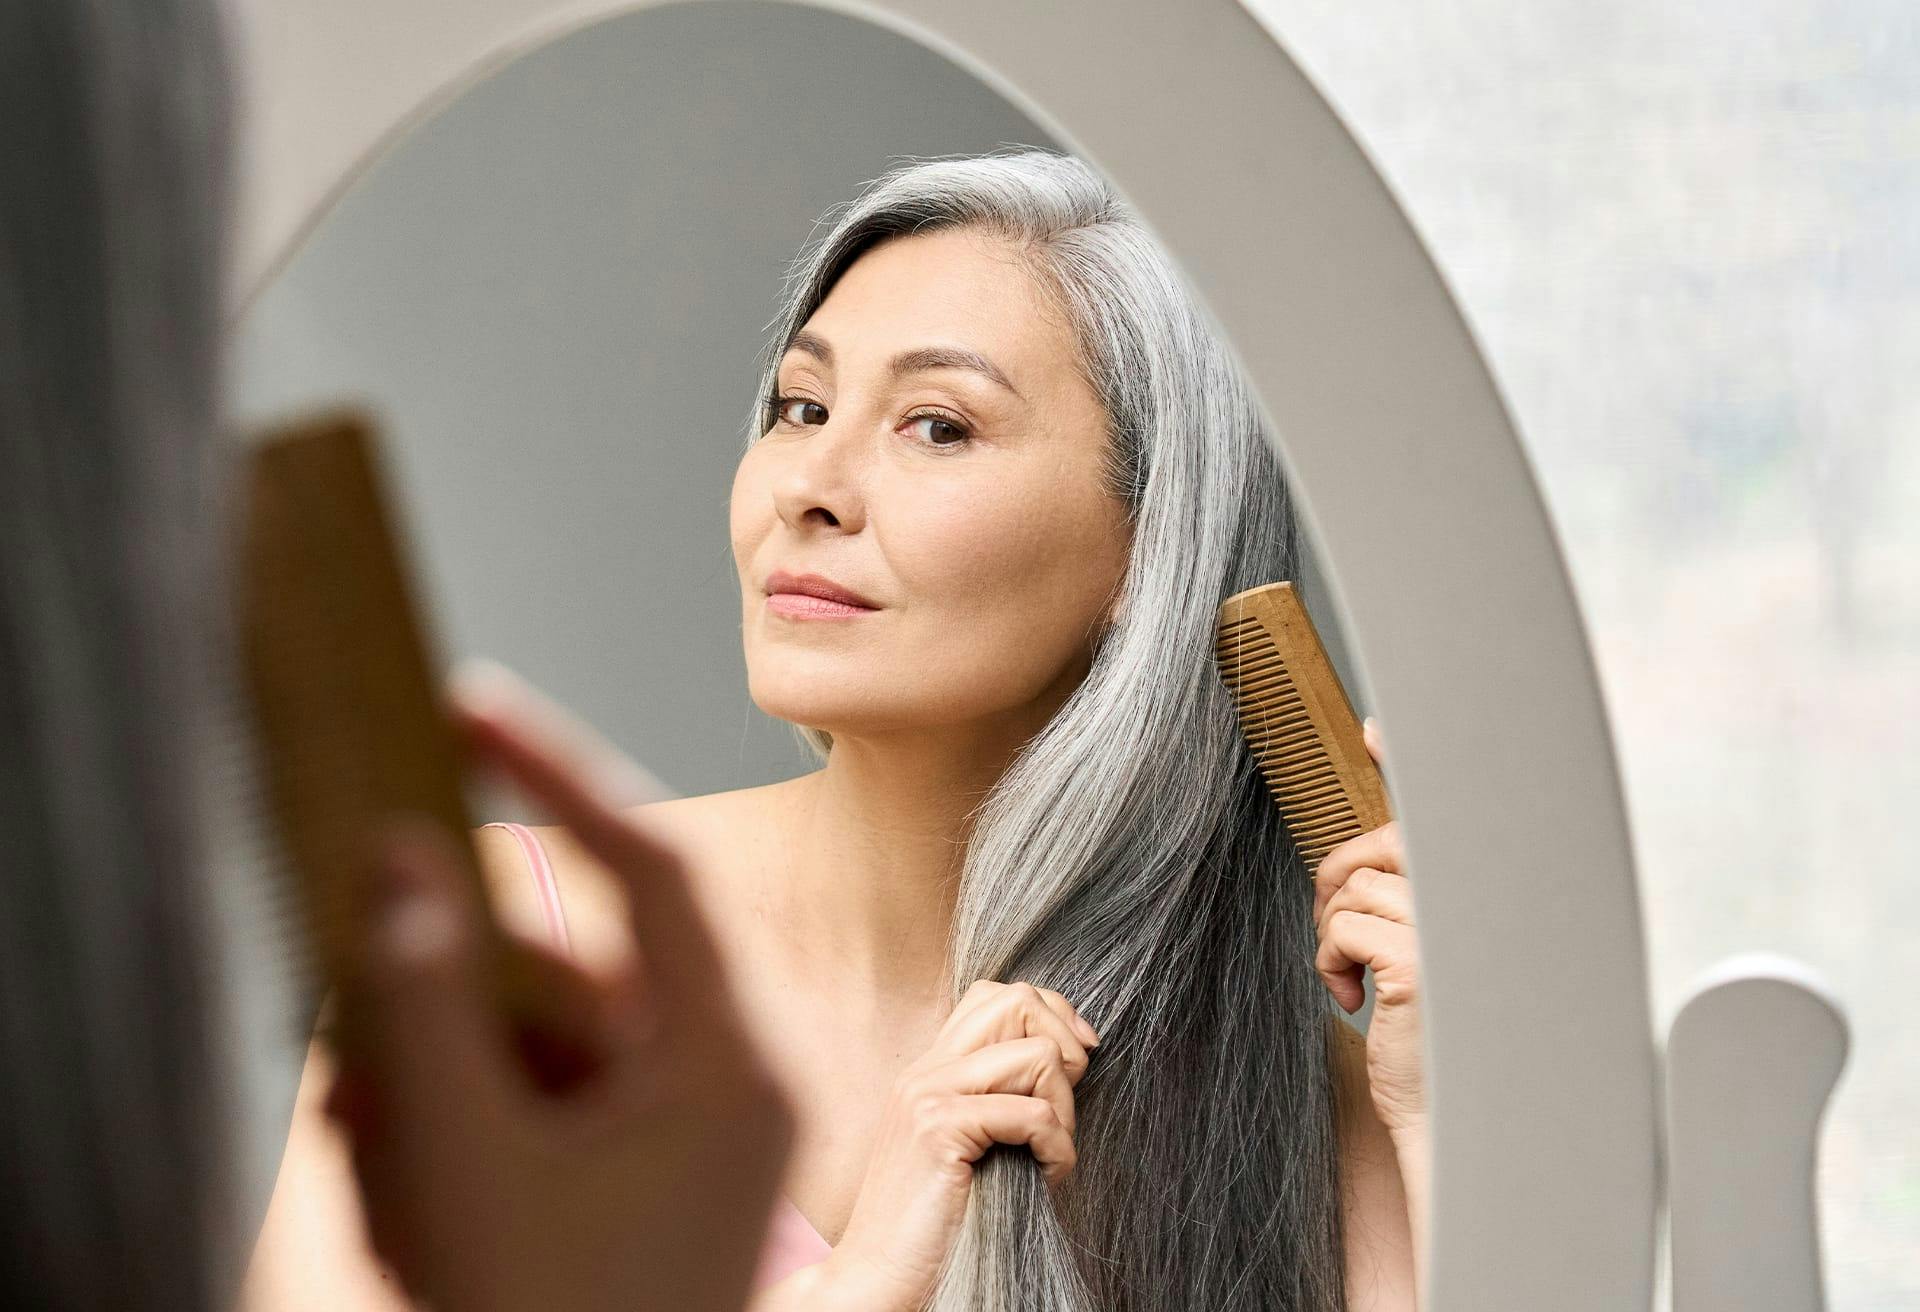 Woman looking in a mirror while brushing her long grey hair